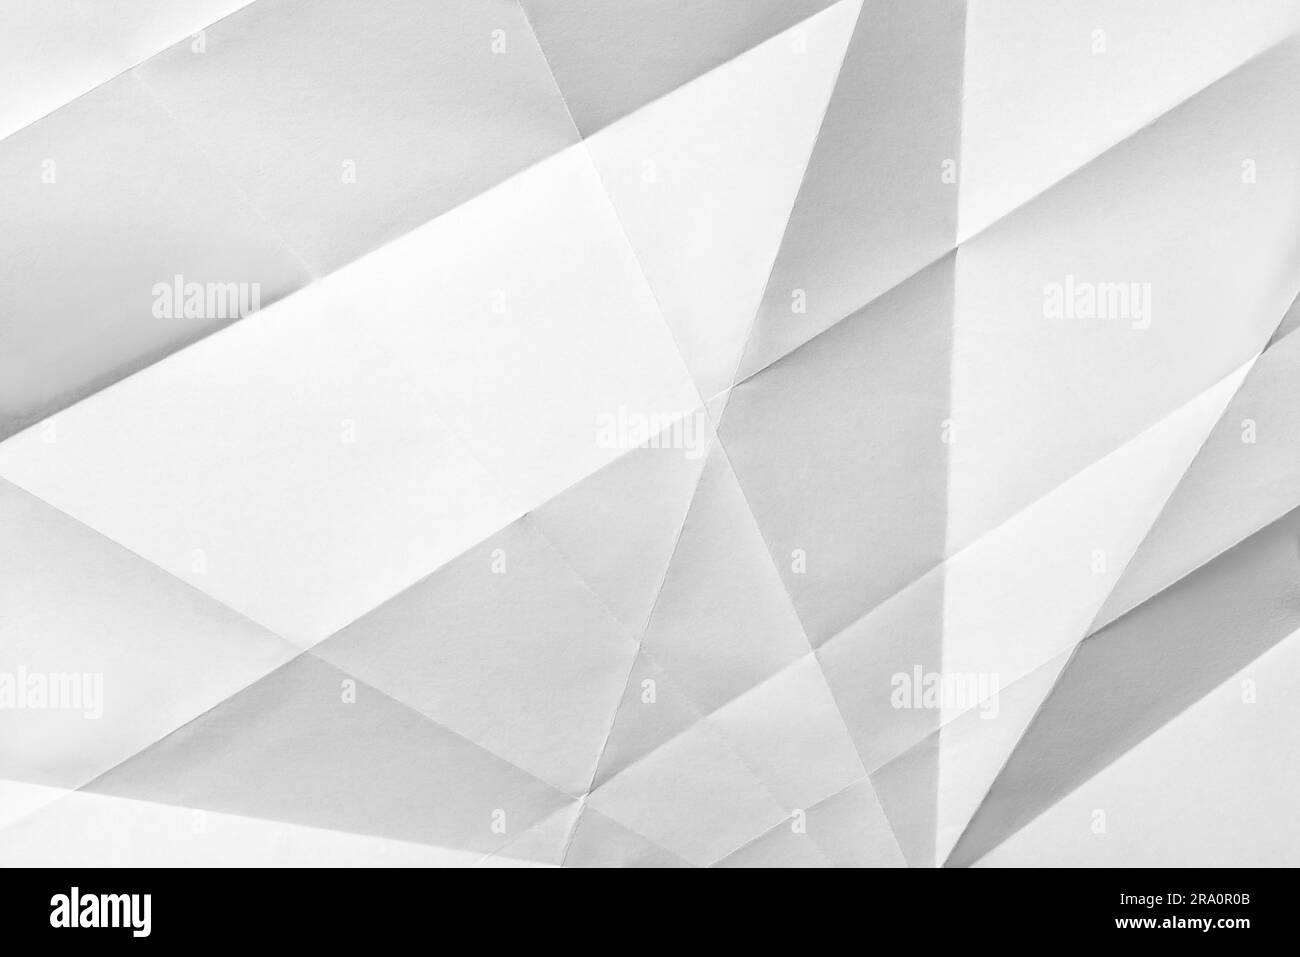 White folded sheet of paper showing an abstract texture design under the light grazing. Good to use as background Stock Photo